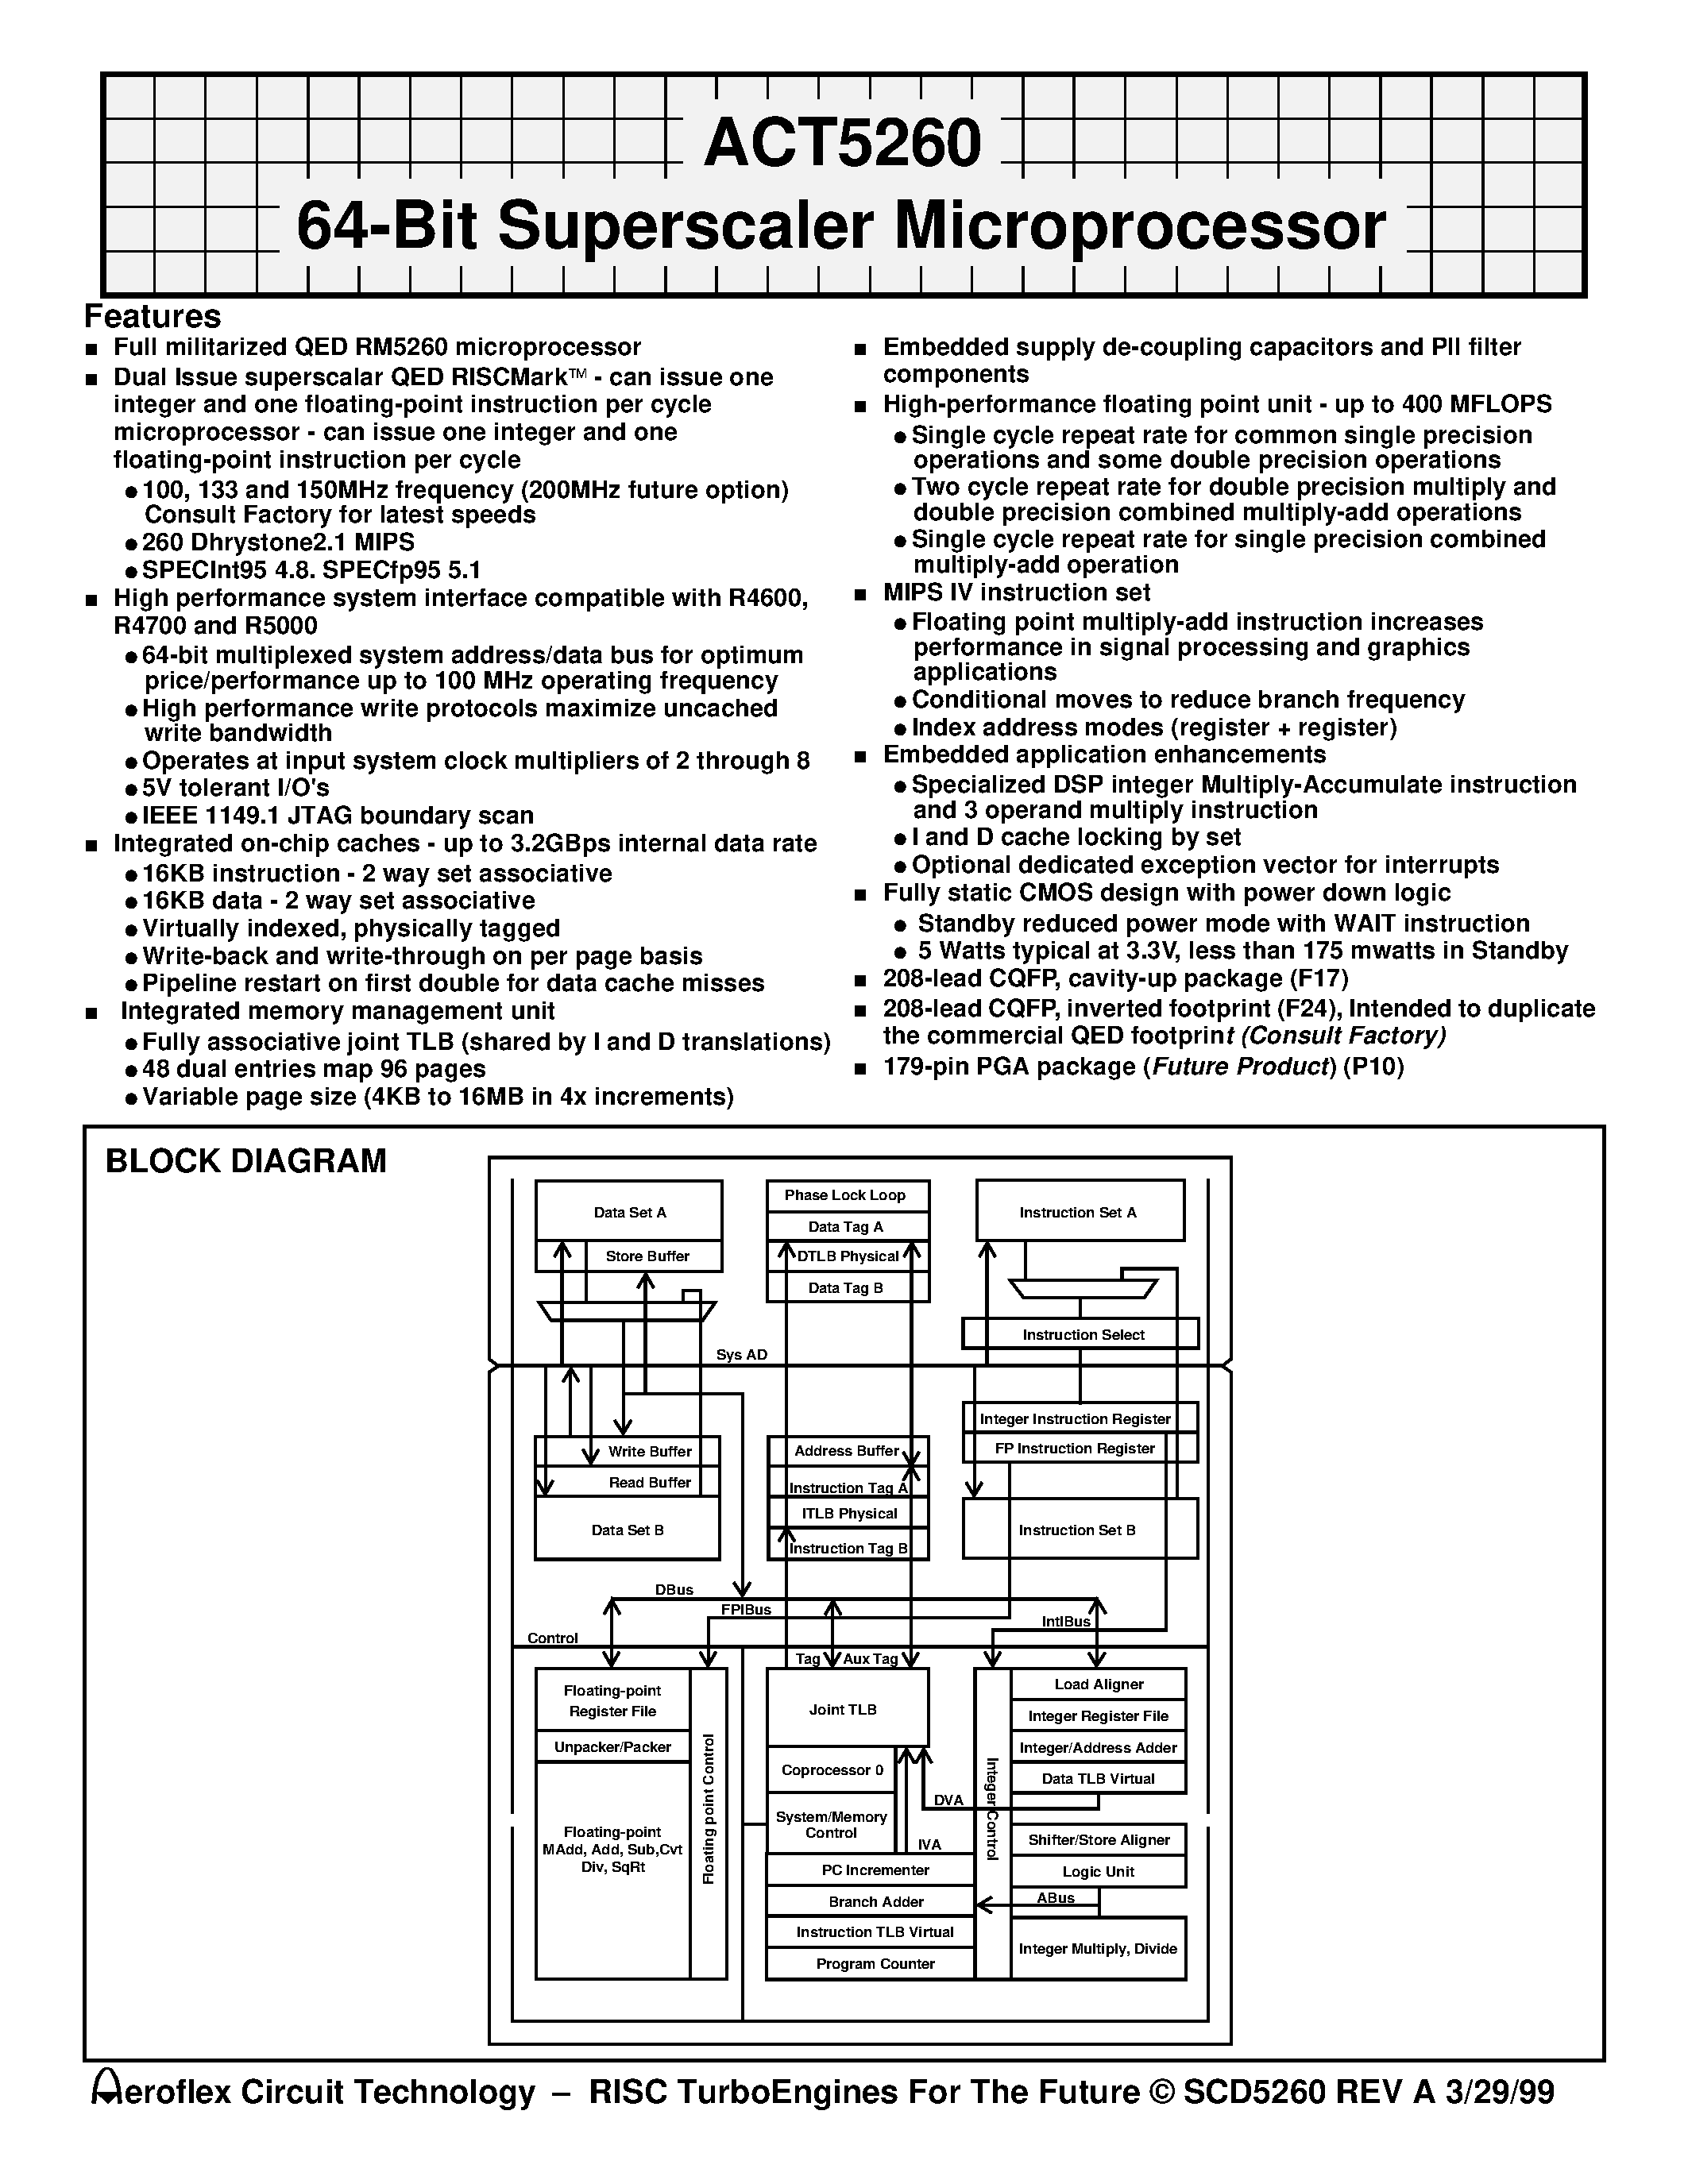 Datasheet ACT-5260PC-100P10M - ACT5260 64-Bit Superscaler Microprocessor page 1